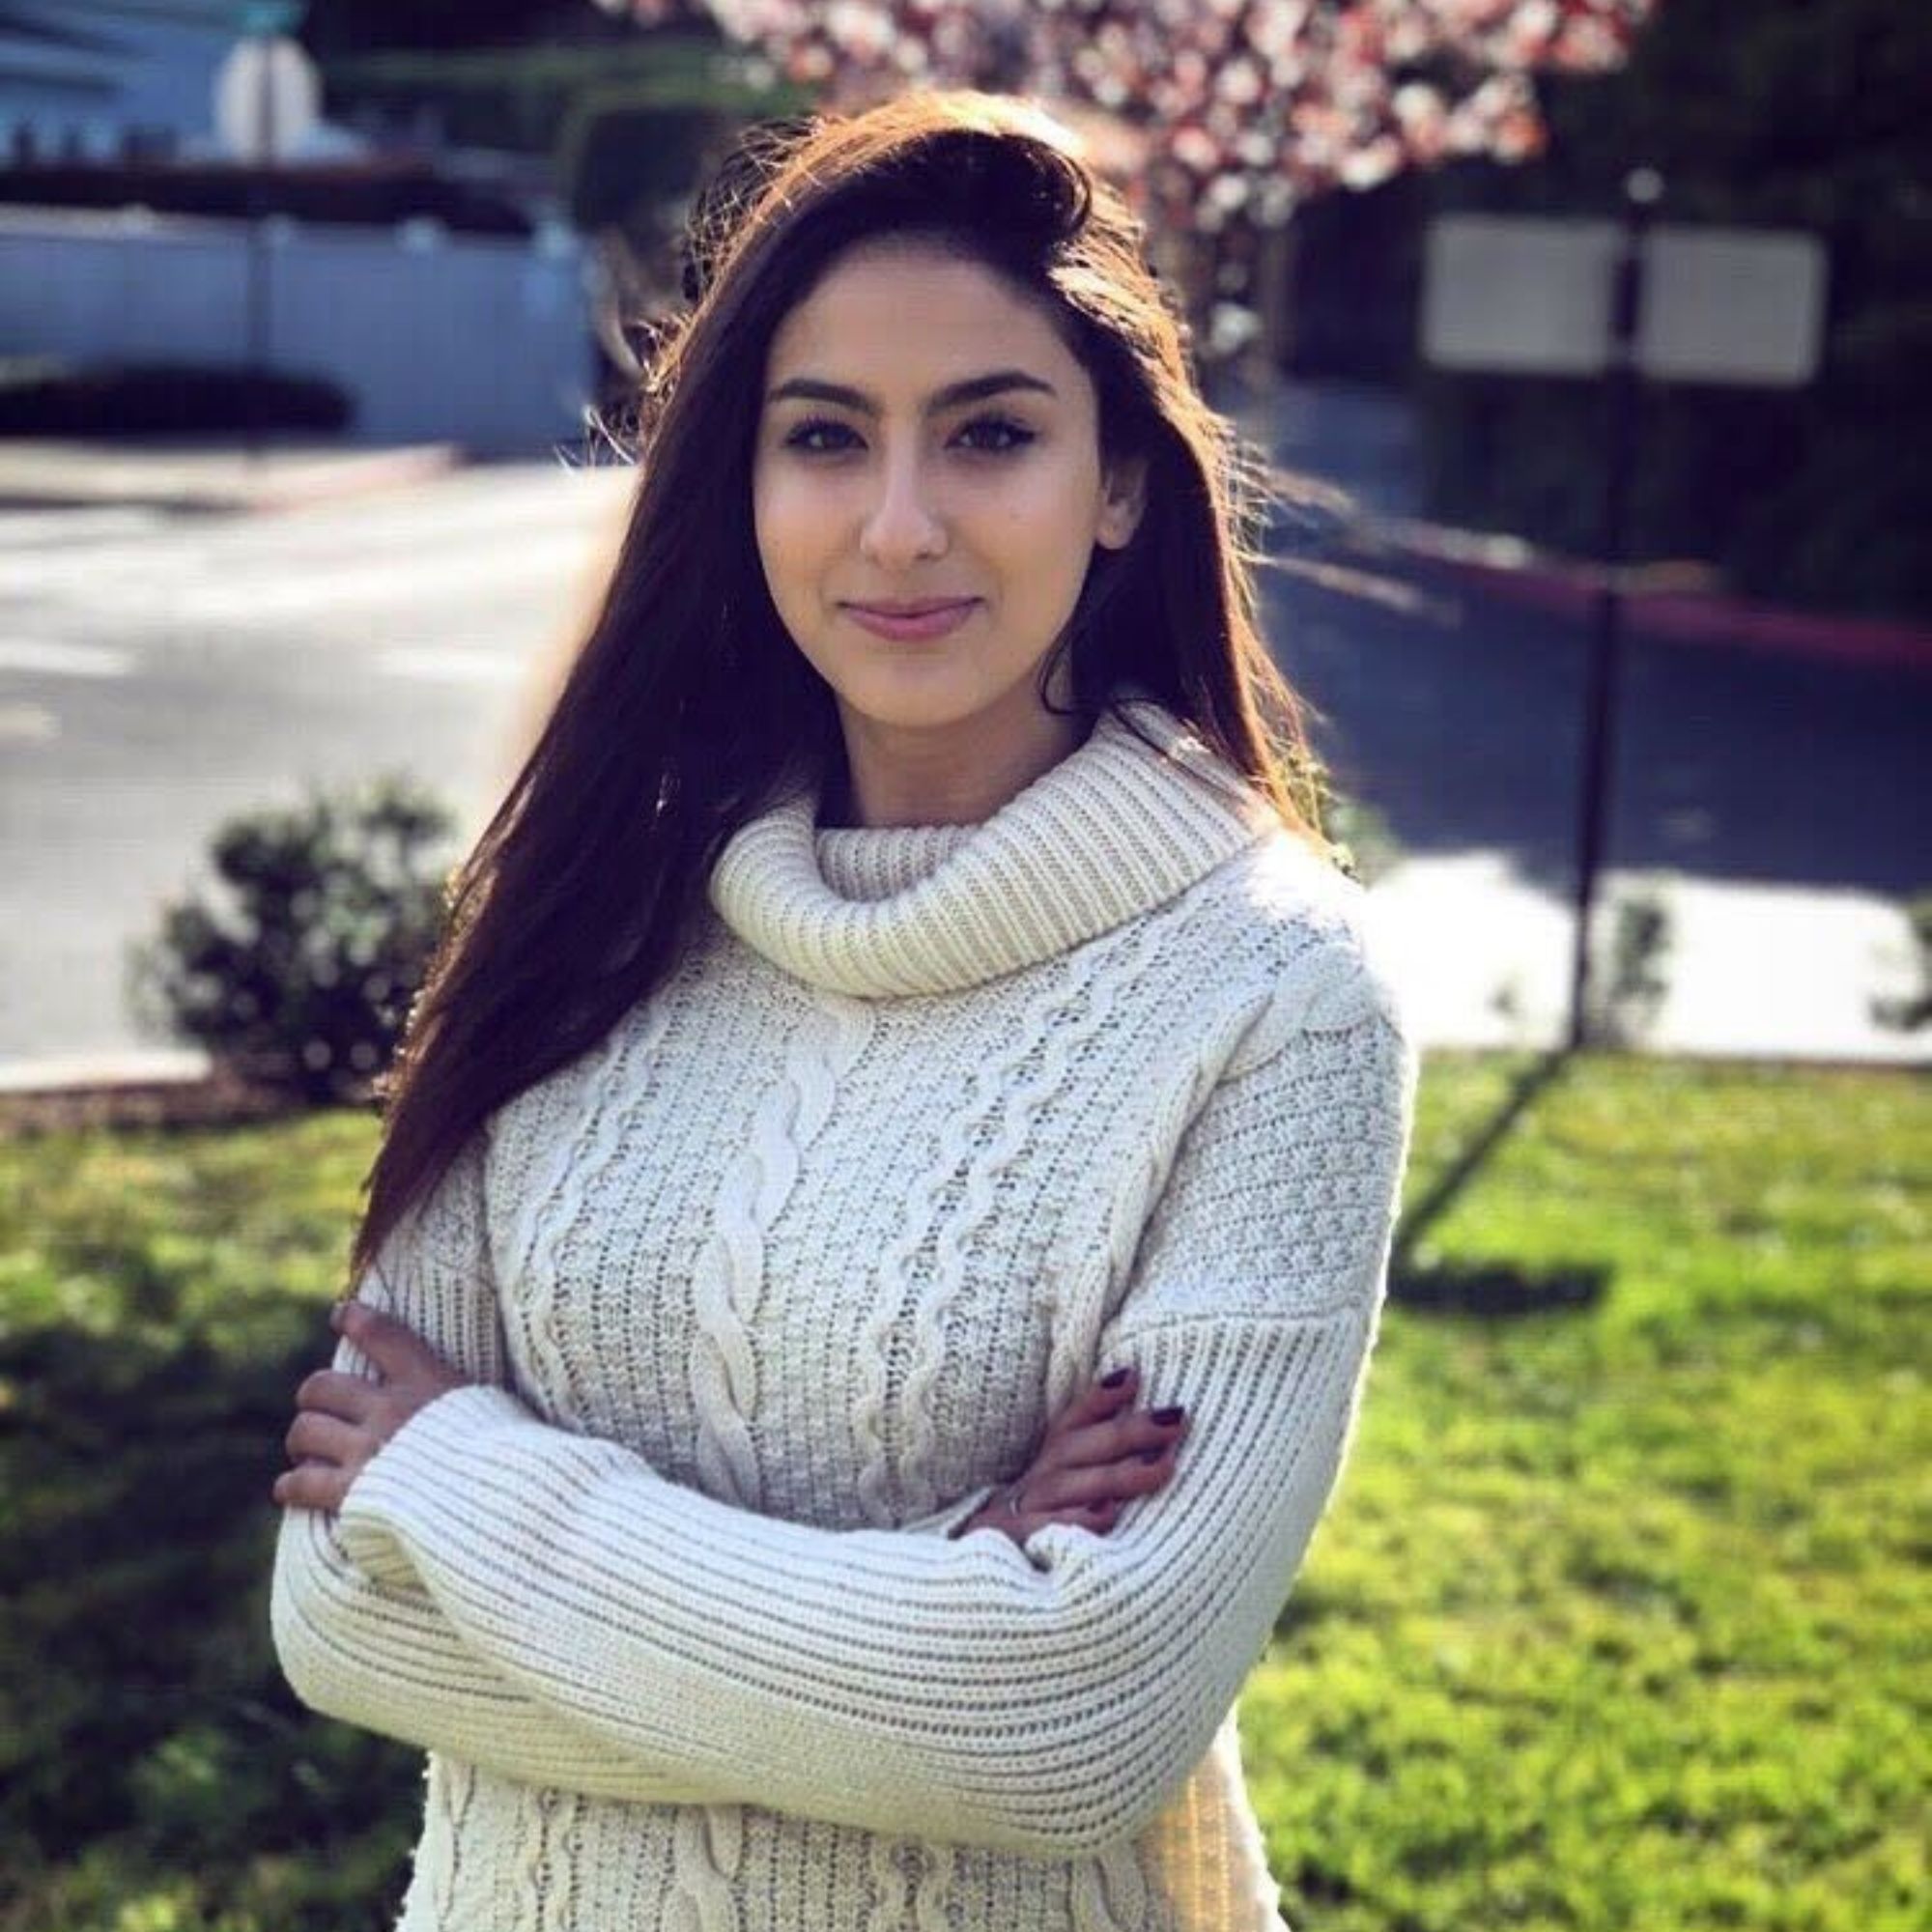 A picture of Malak Bellajdel, a woman with long brown hair wearing a white jumper with her arms folded, in front of a road with a lawn and a cherry blossom tree